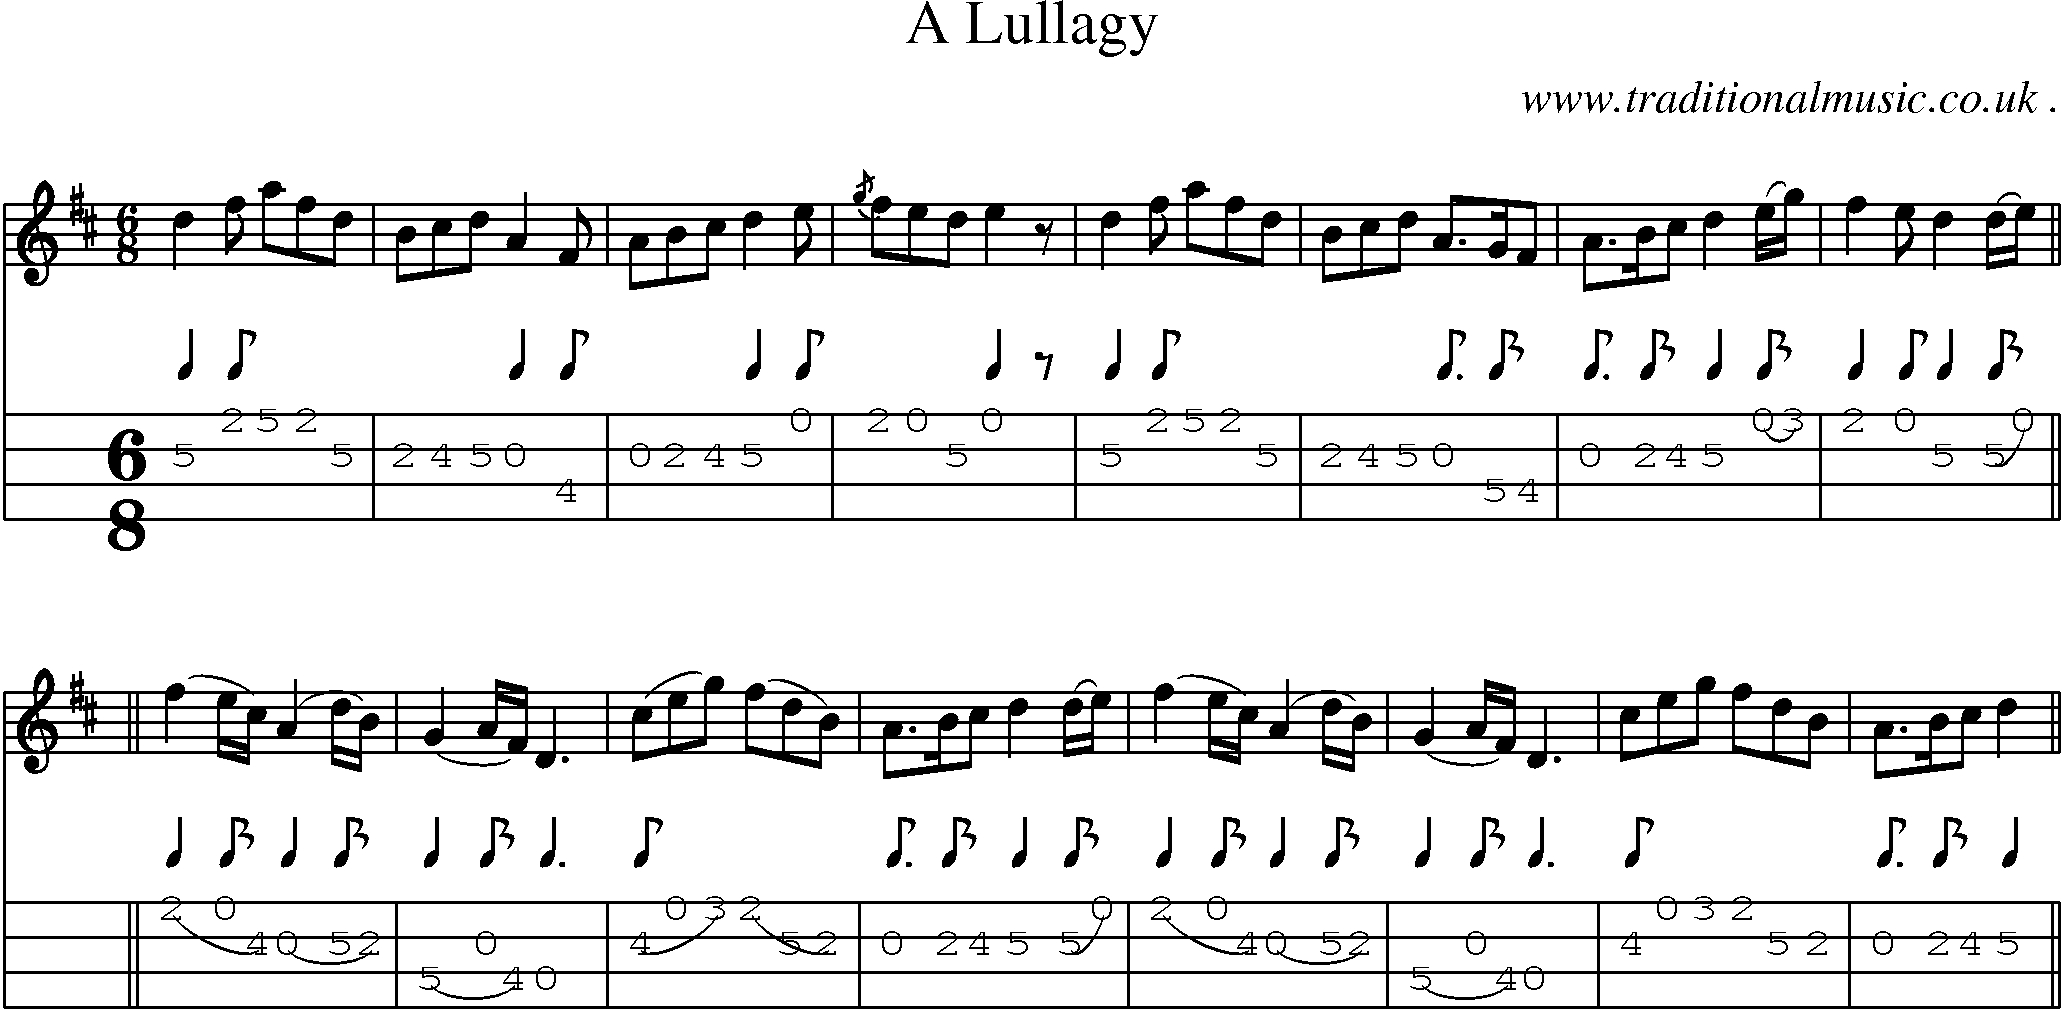 Sheet-music  score, Chords and Mandolin Tabs for A Lullagy